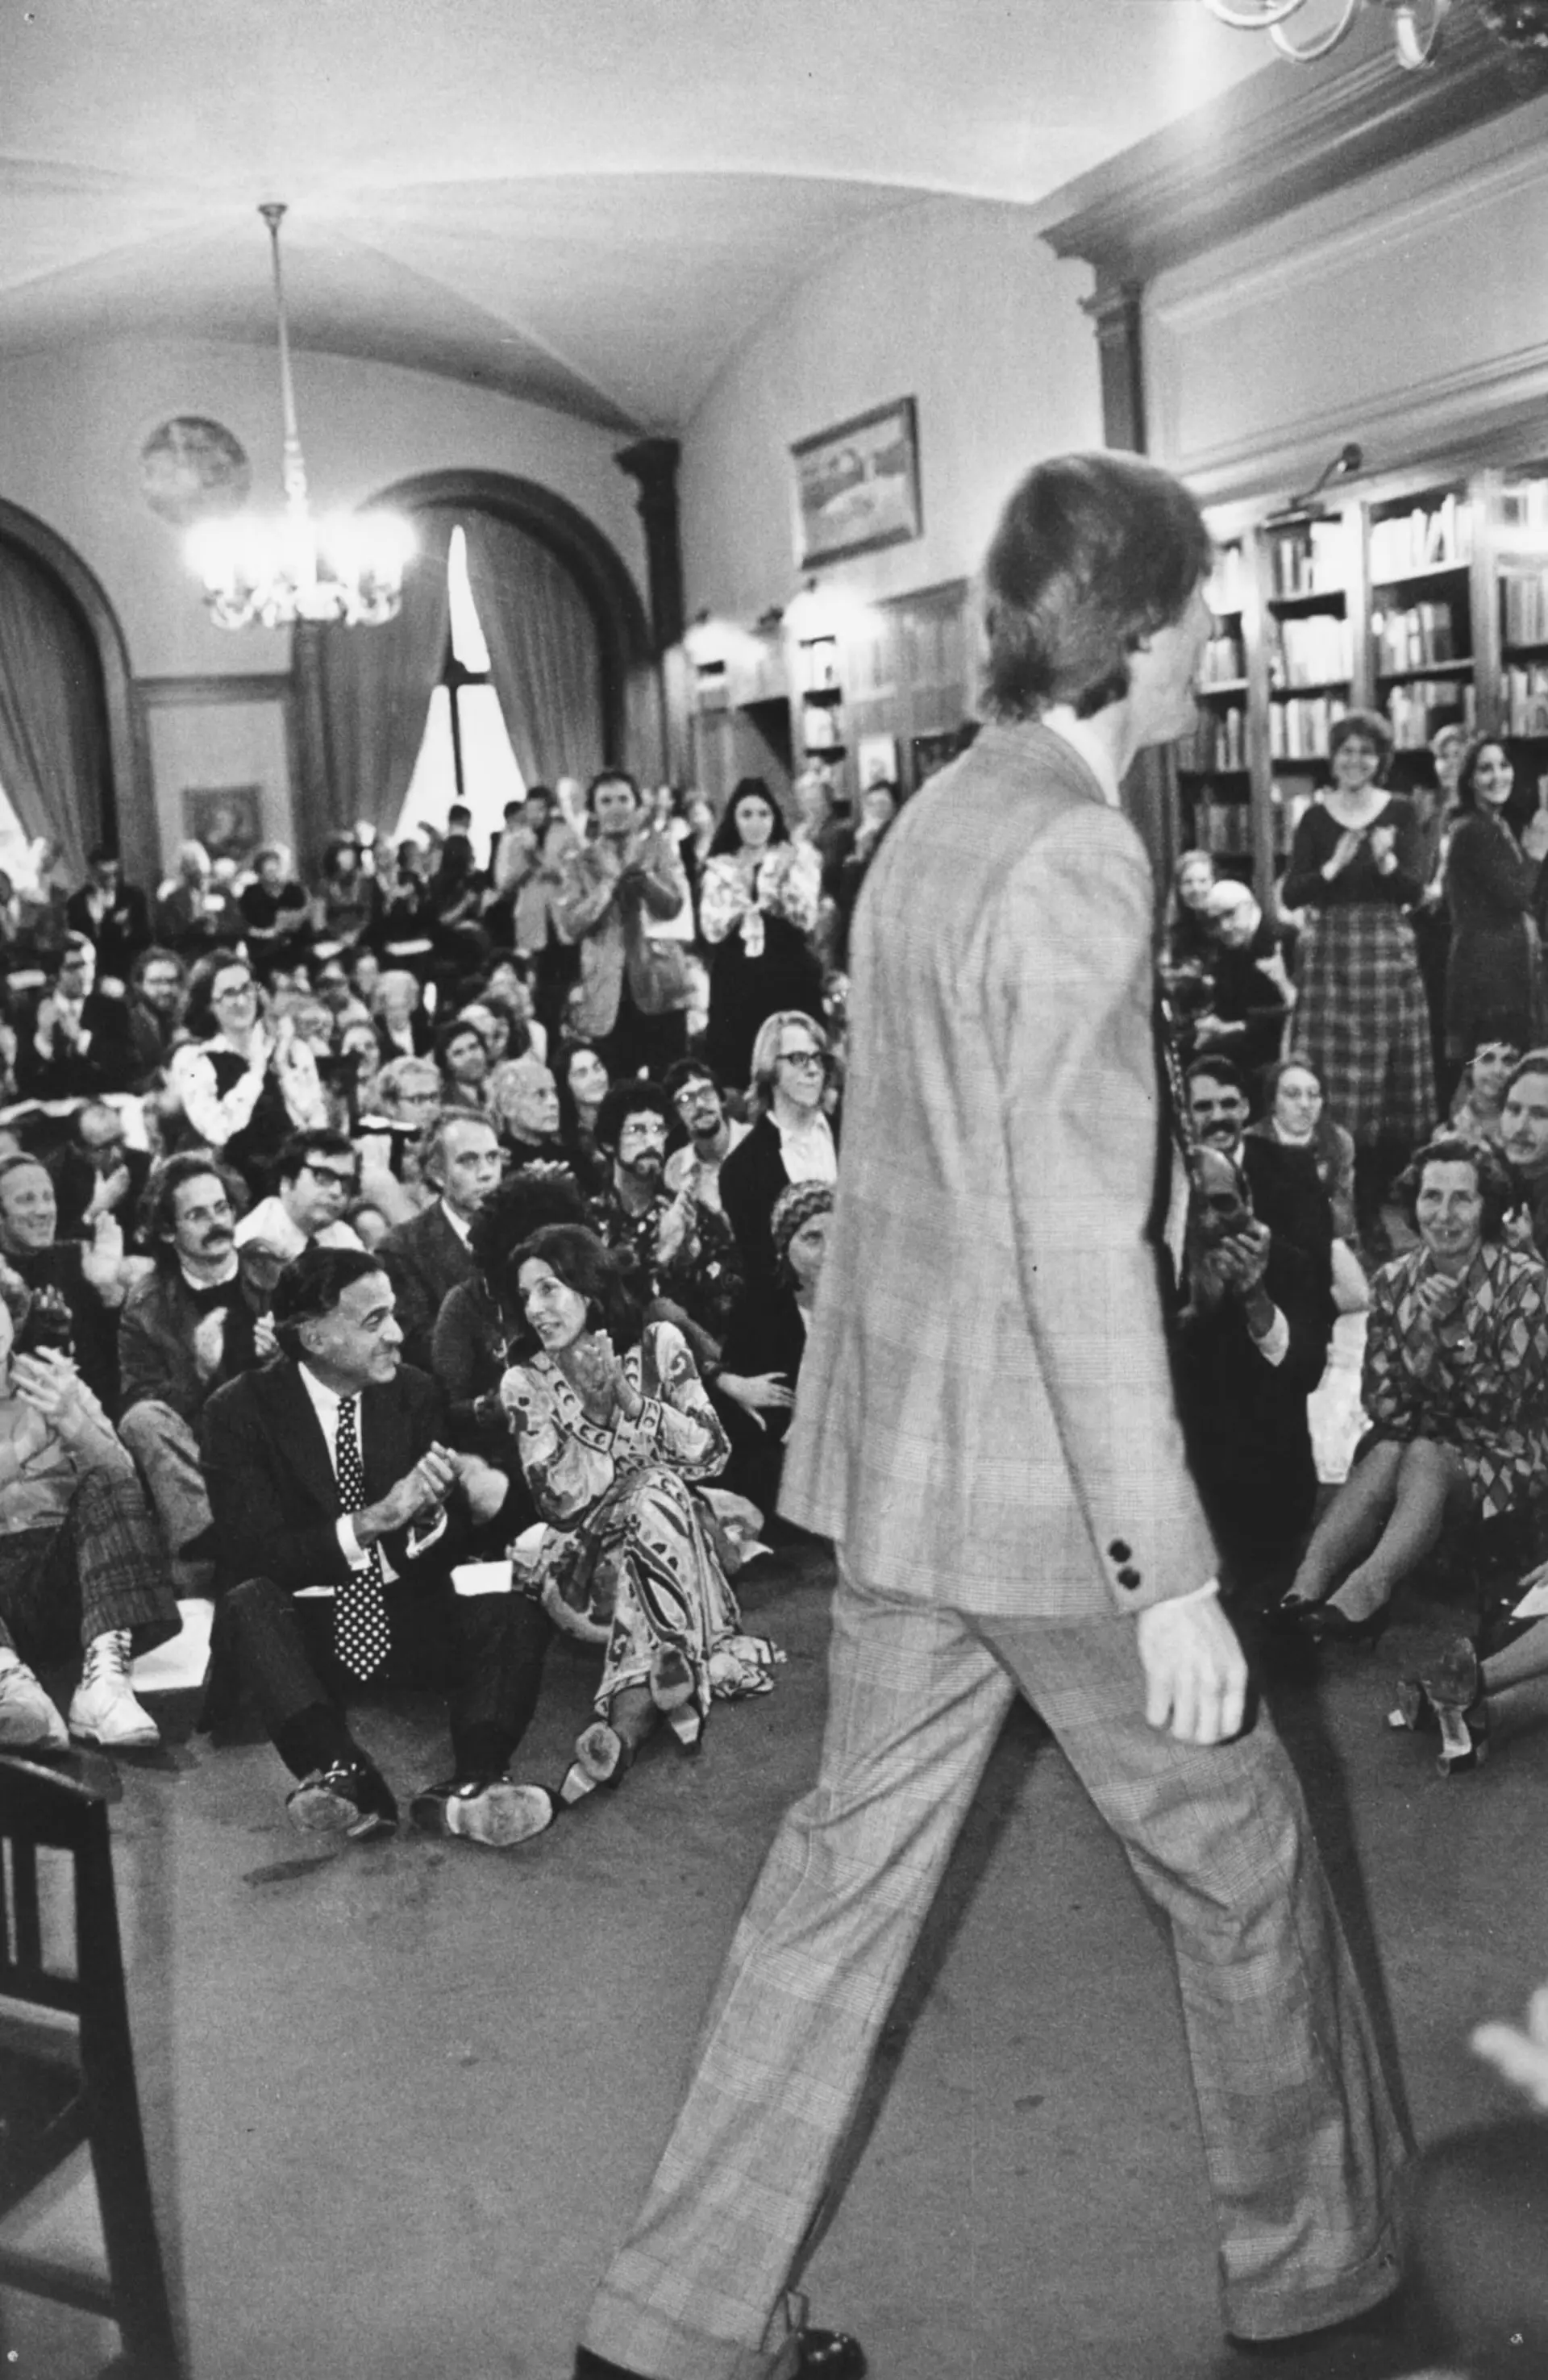 A man walks in front of an audience seated on the floor in a library